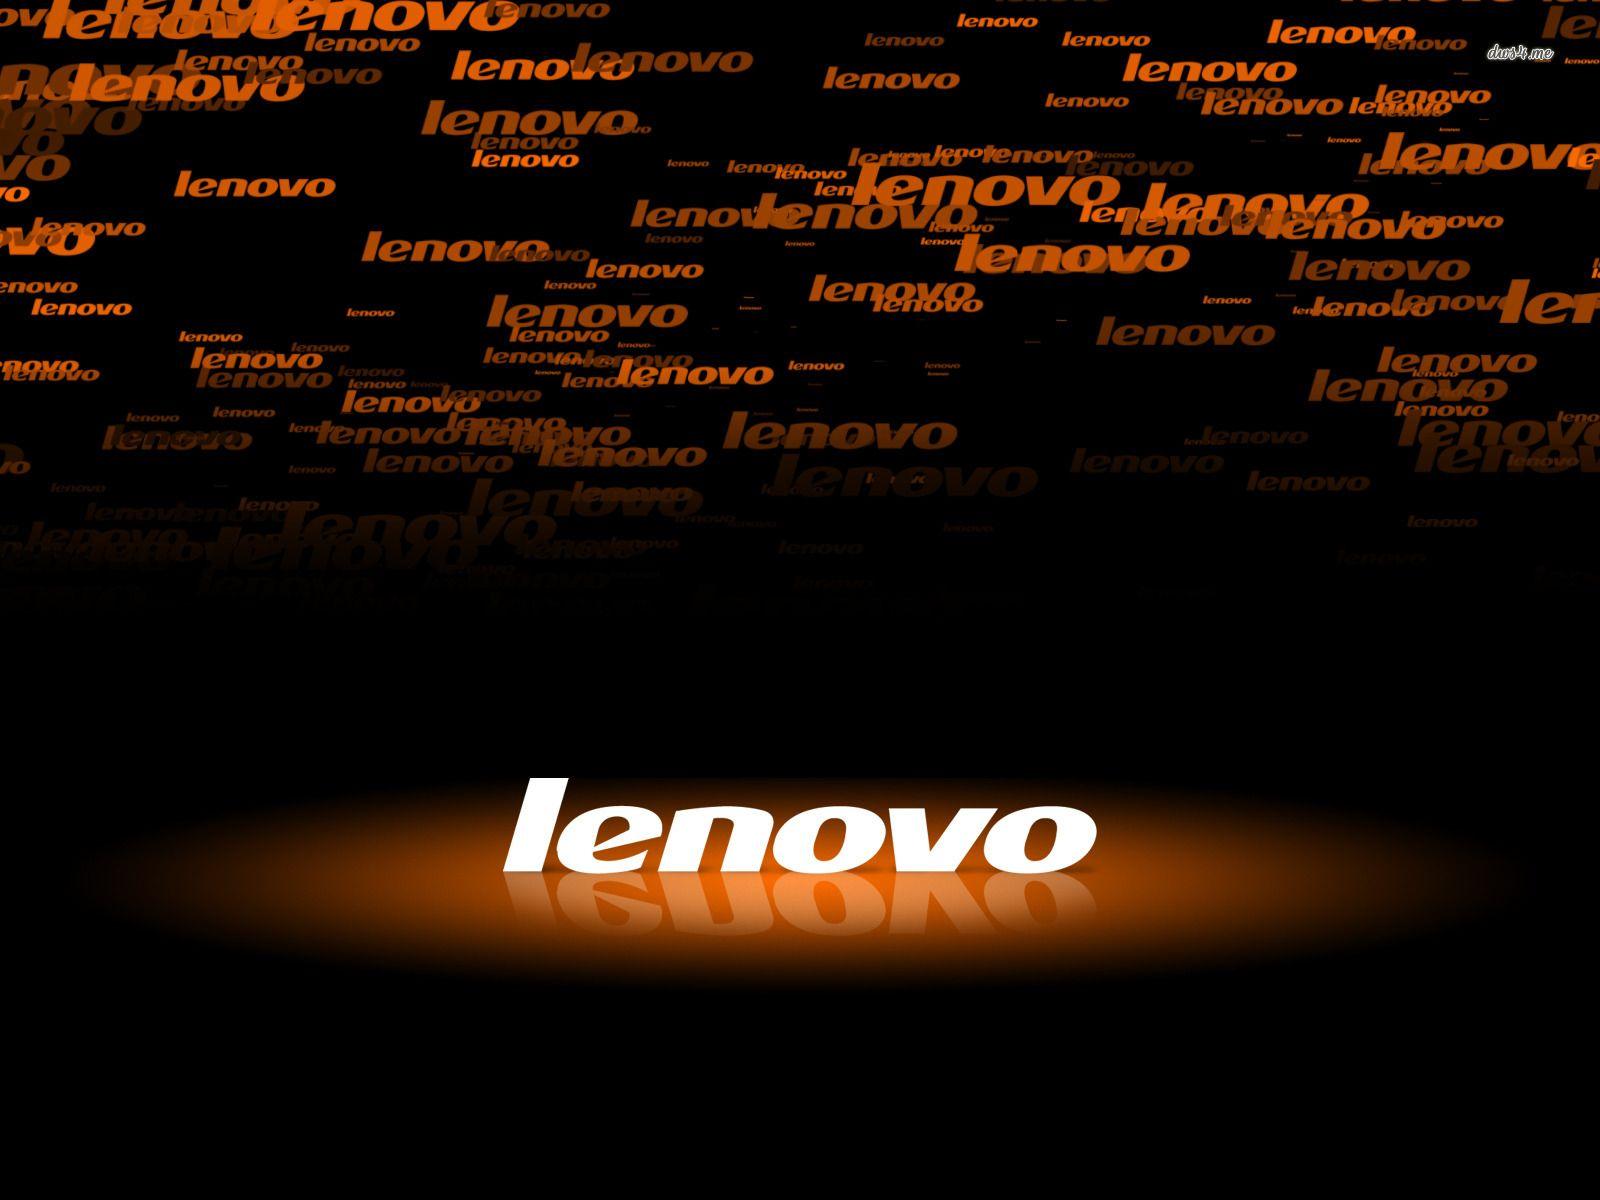 Lenovo live wallpapers for Android - free download from Mob.org